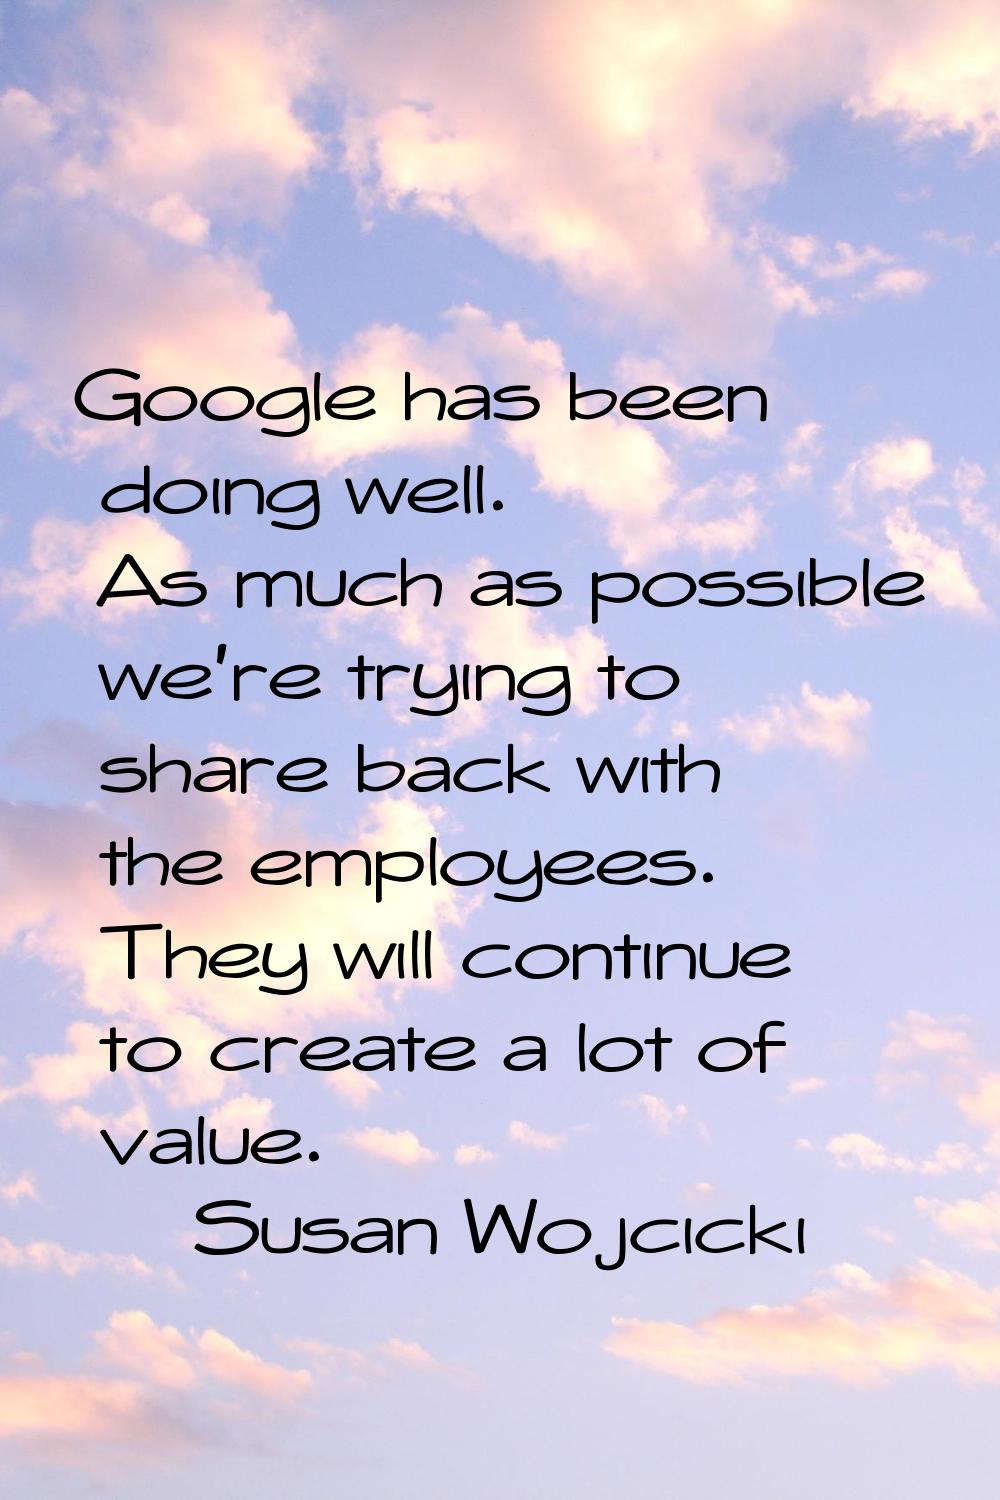 Google has been doing well. As much as possible we're trying to share back with the employees. They